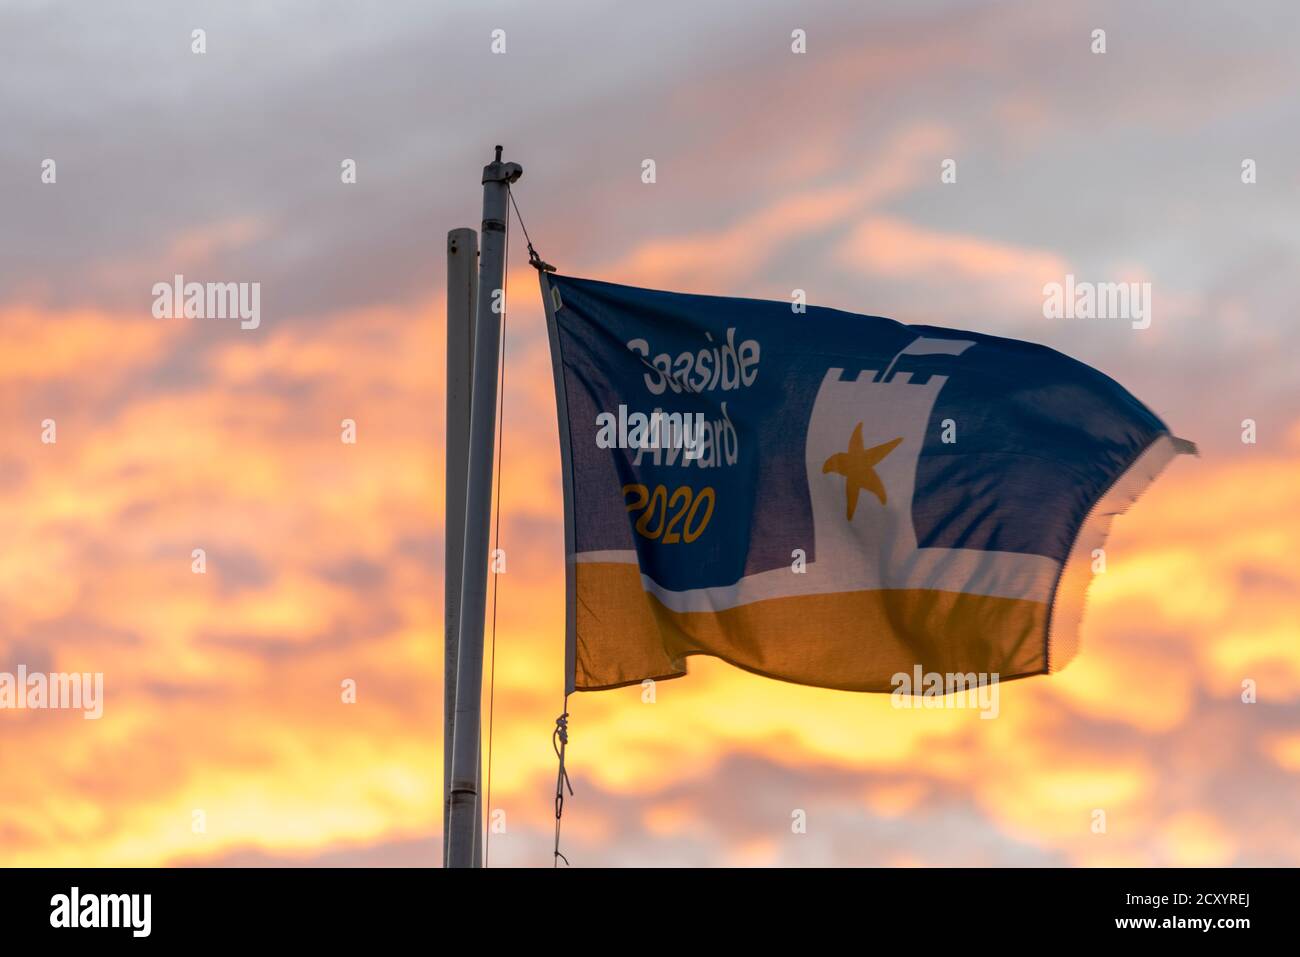 Seaside award 2020 flag flying at sunset at Southend on Sea, Essex, UK. Formerly called the Quality Coast Award Stock Photo